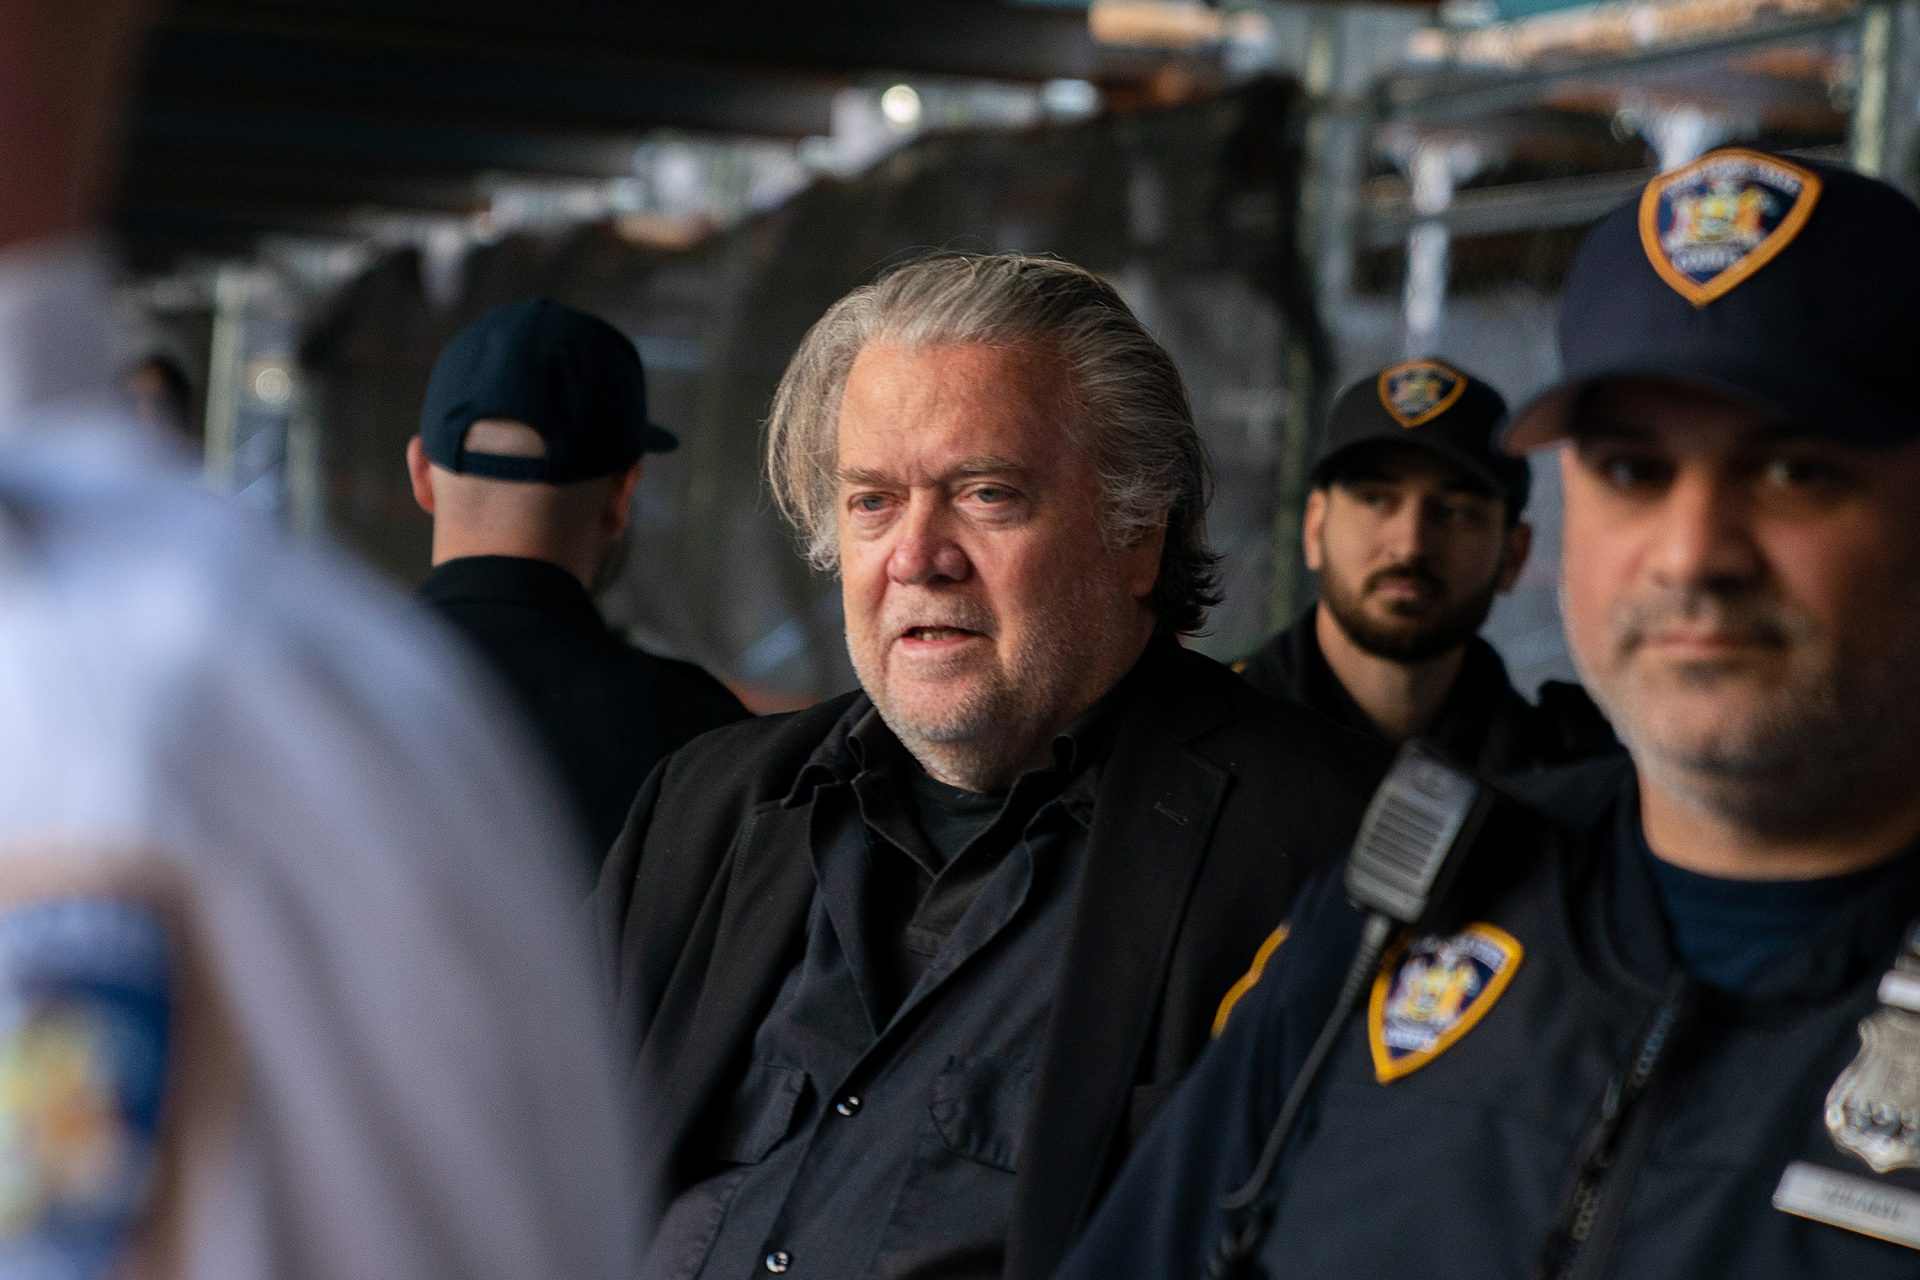 A judge appointed by Trump is sending Bannon to jail